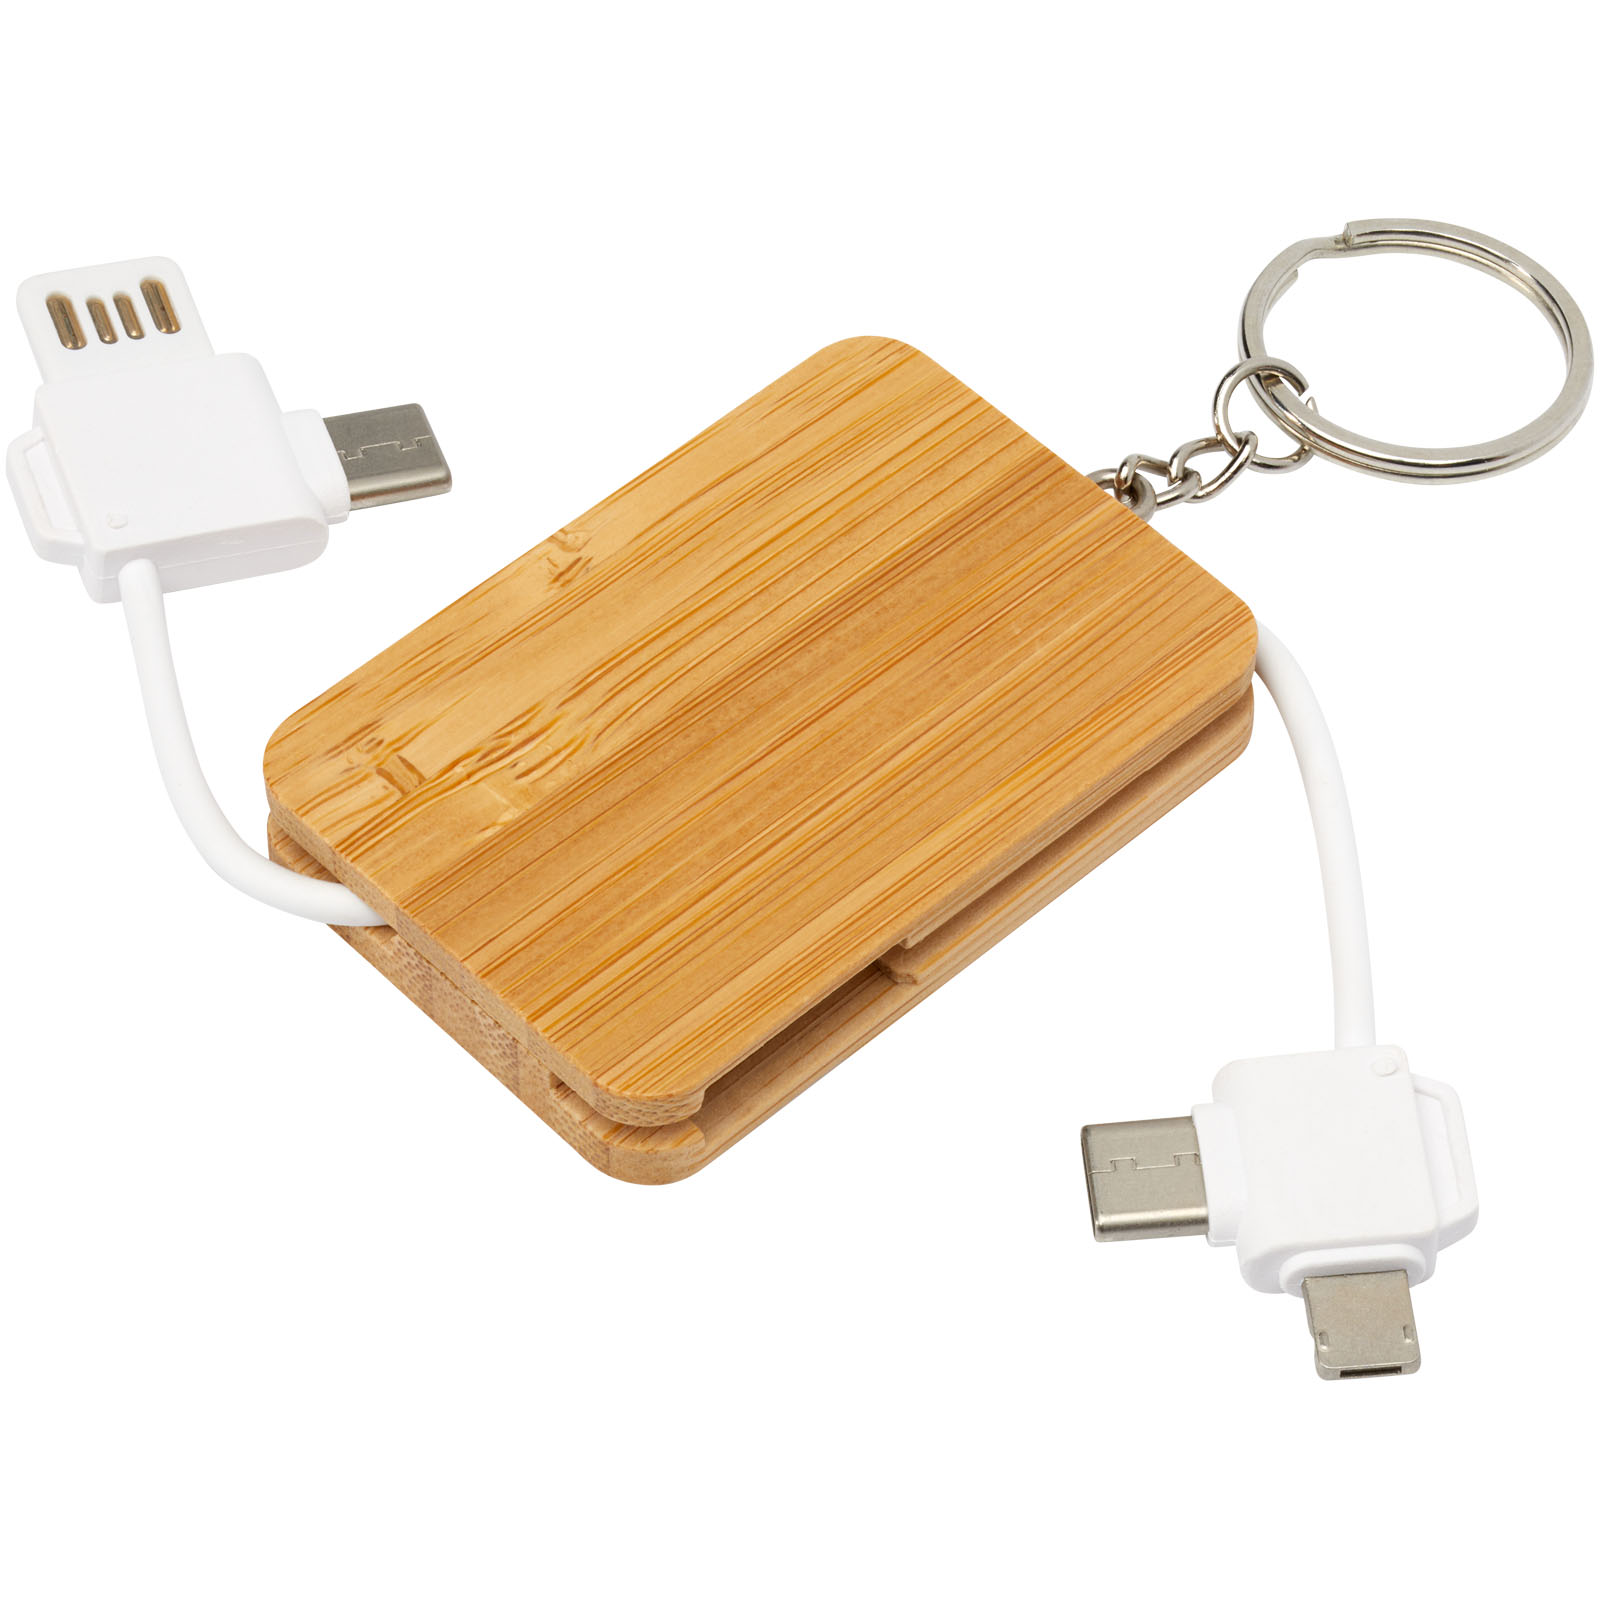 Advertising Cables - Reel 6-in-1 retractable bamboo key ring charging cable